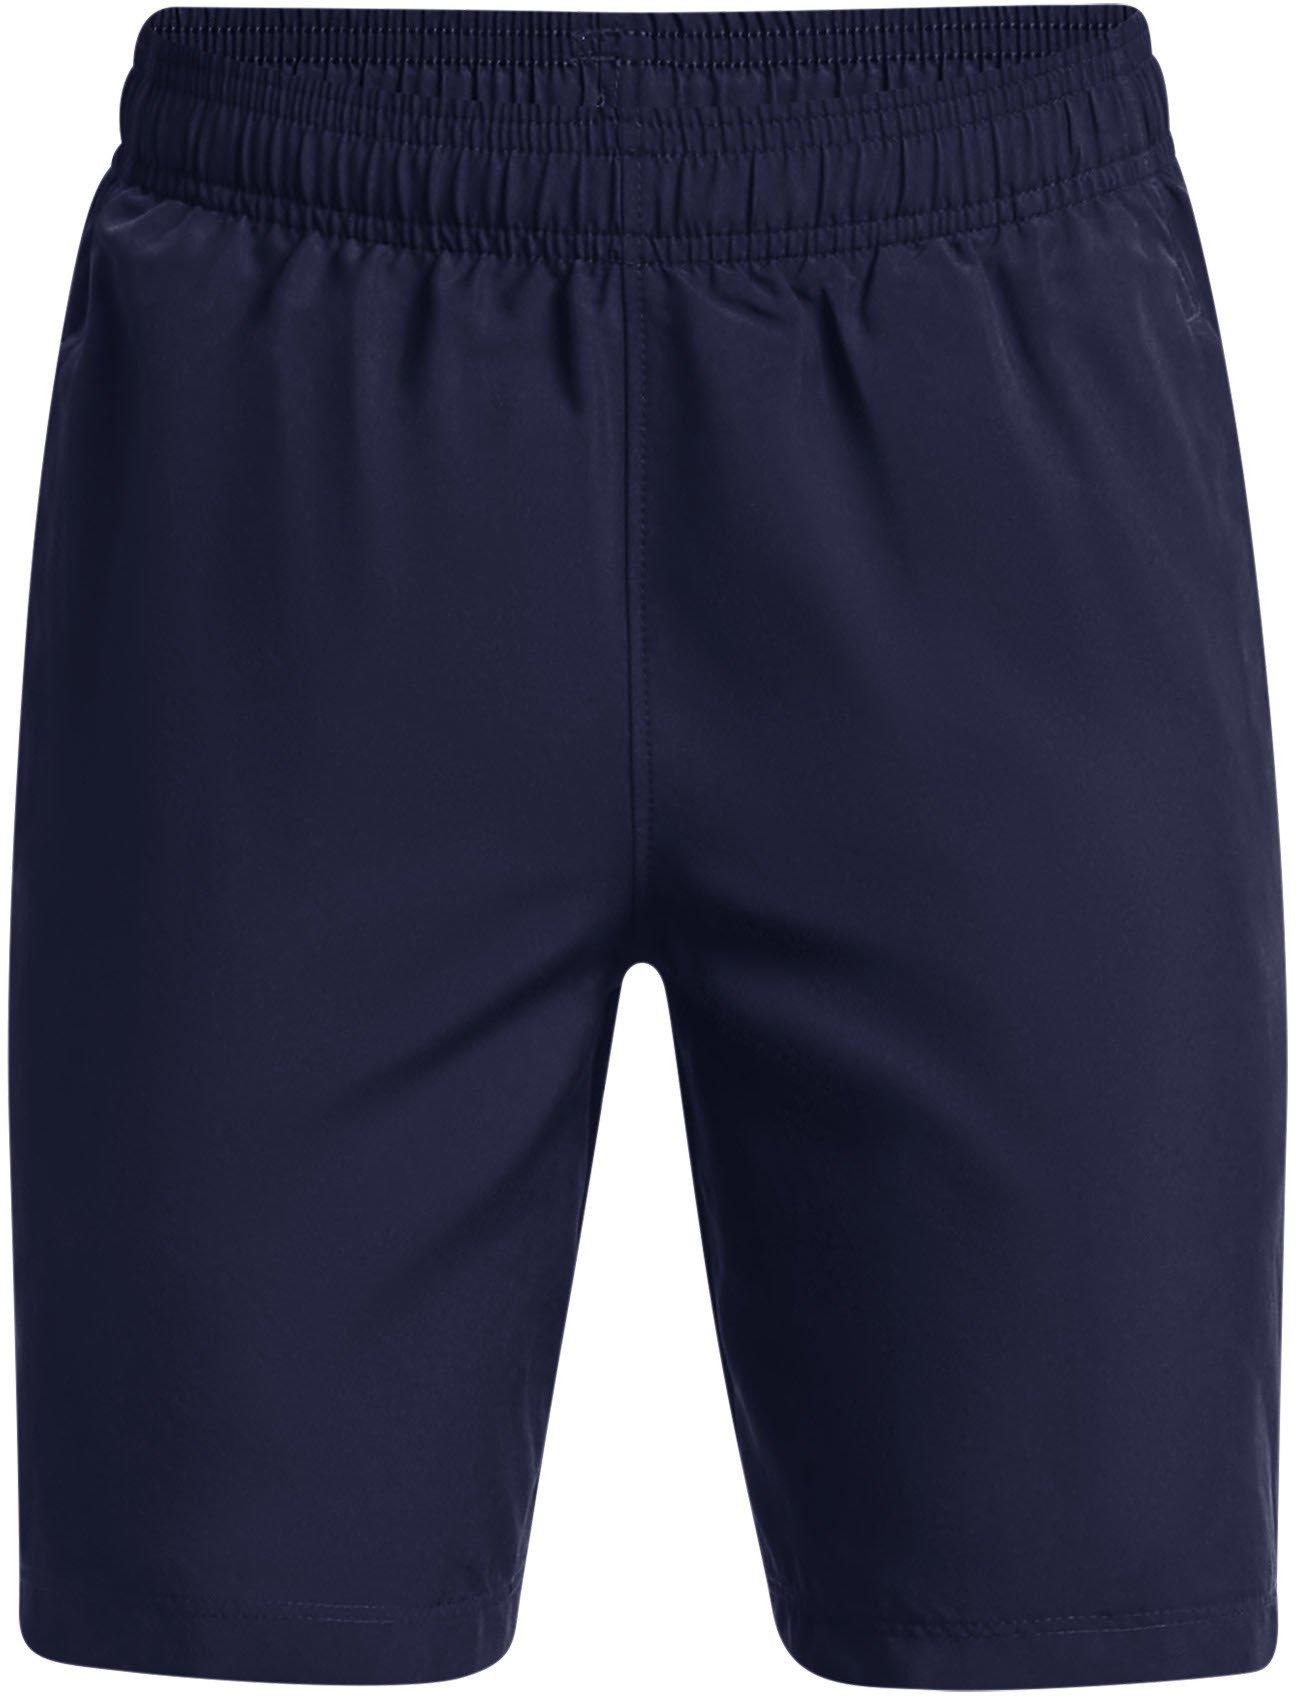 Under Armour Woven Graphic Shorts-NVY L